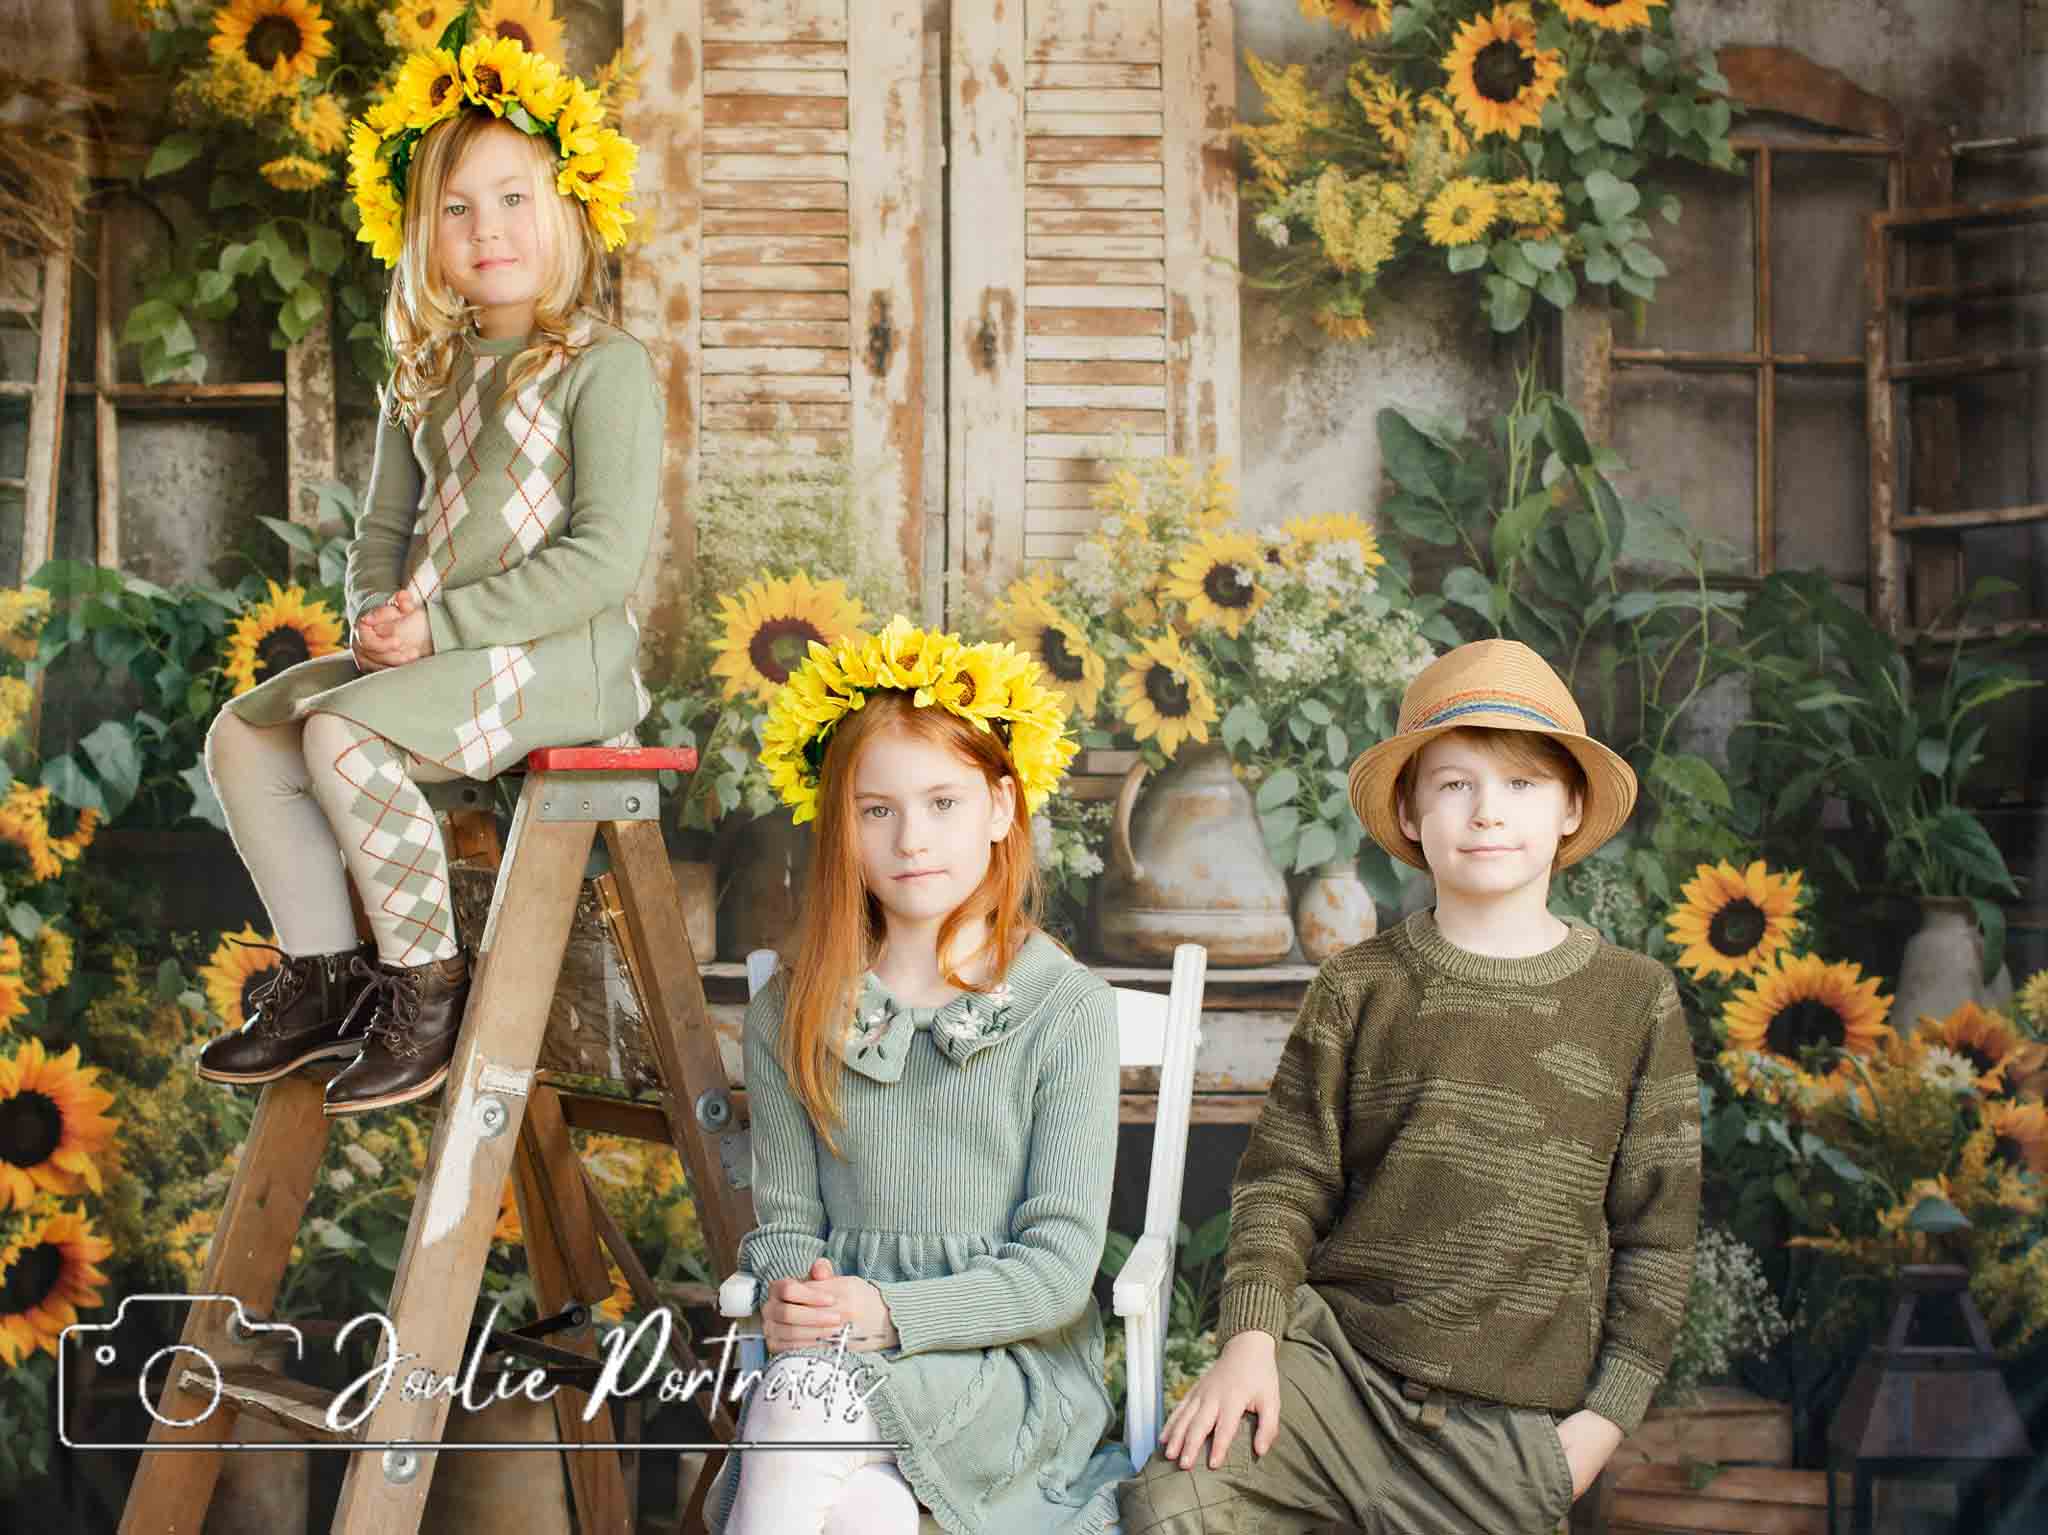 Kate Summer Sunflowers Old Furniture Room Backdrop Designed by Emetselch